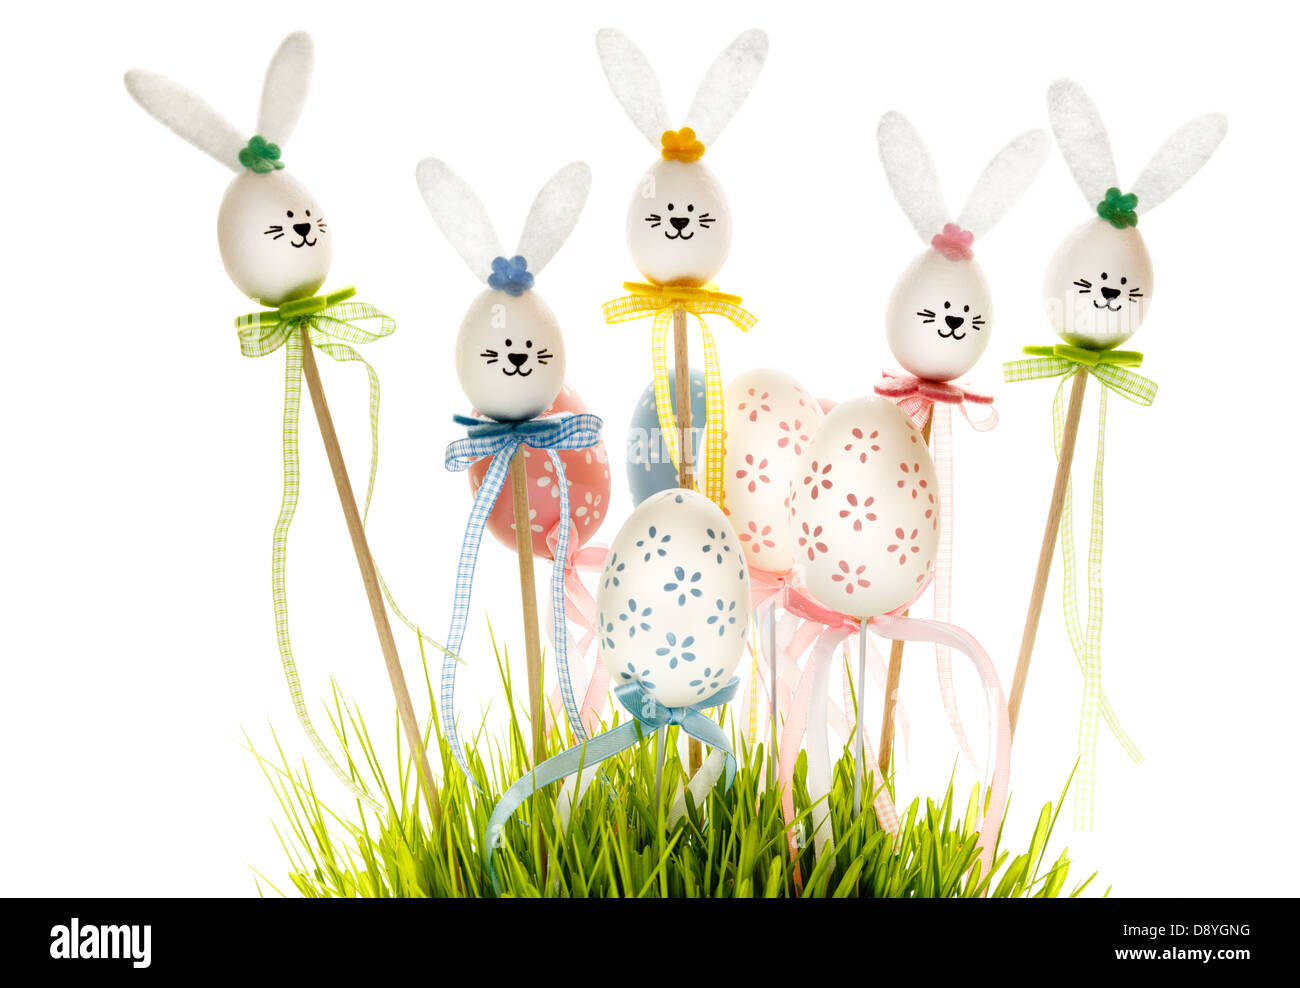 Easter eggs and bunnies in grass Stock Photo